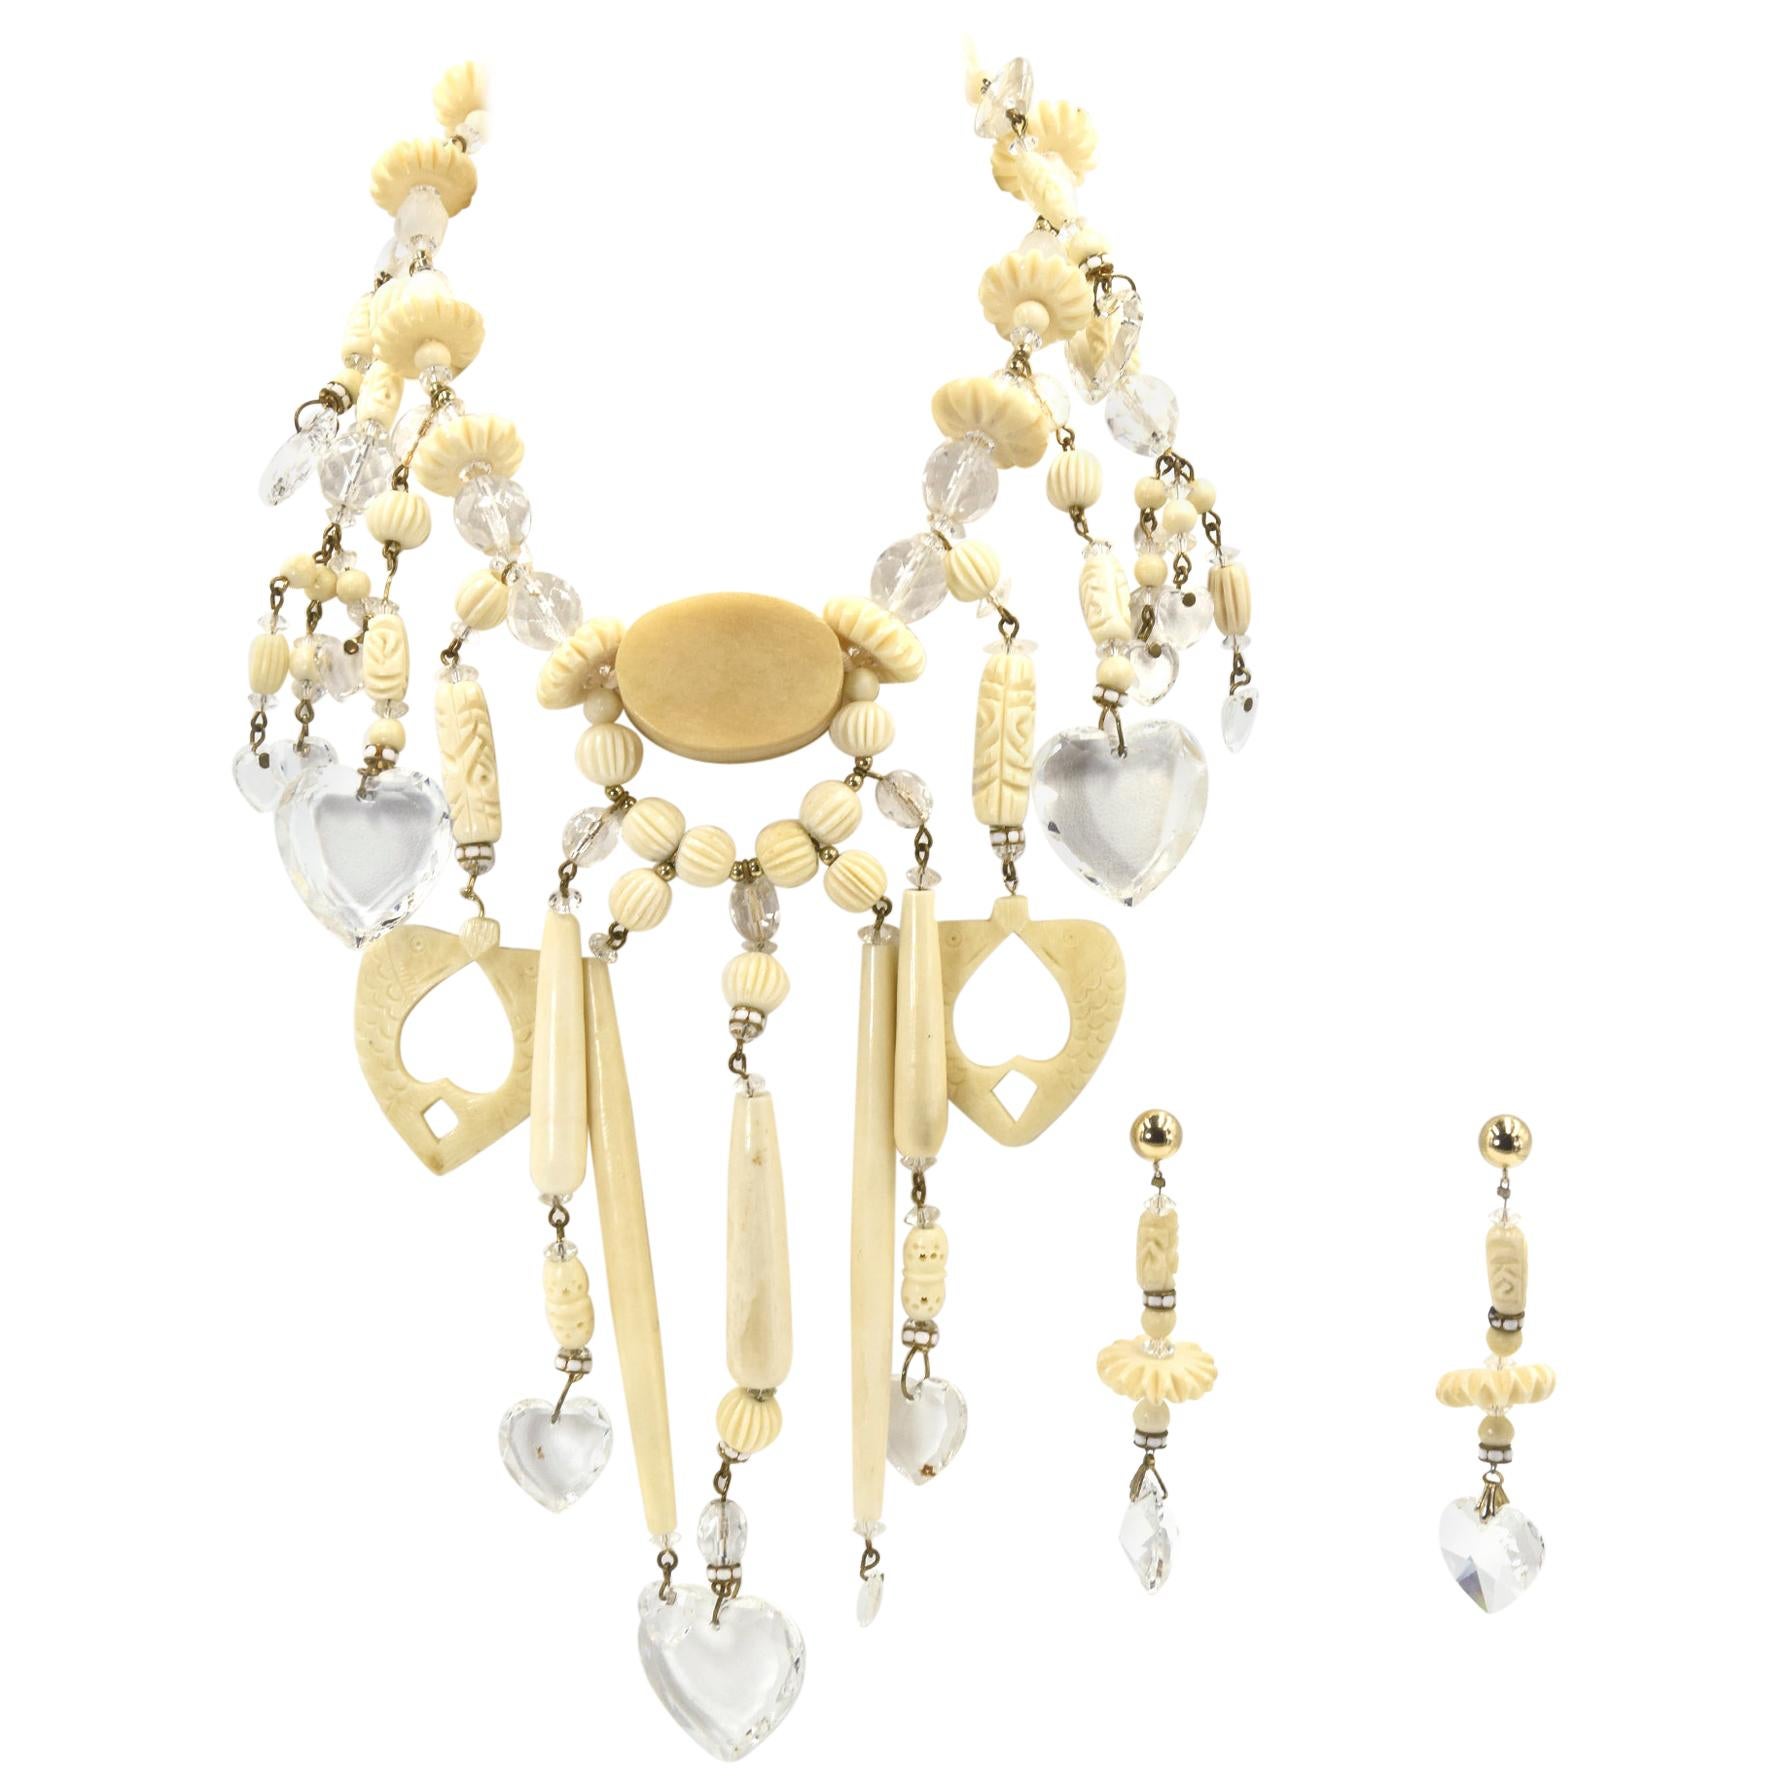 Bohemian Chic Carved Bone and Lucite Hearts Bib Necklace with Dangling Earrings  For Sale